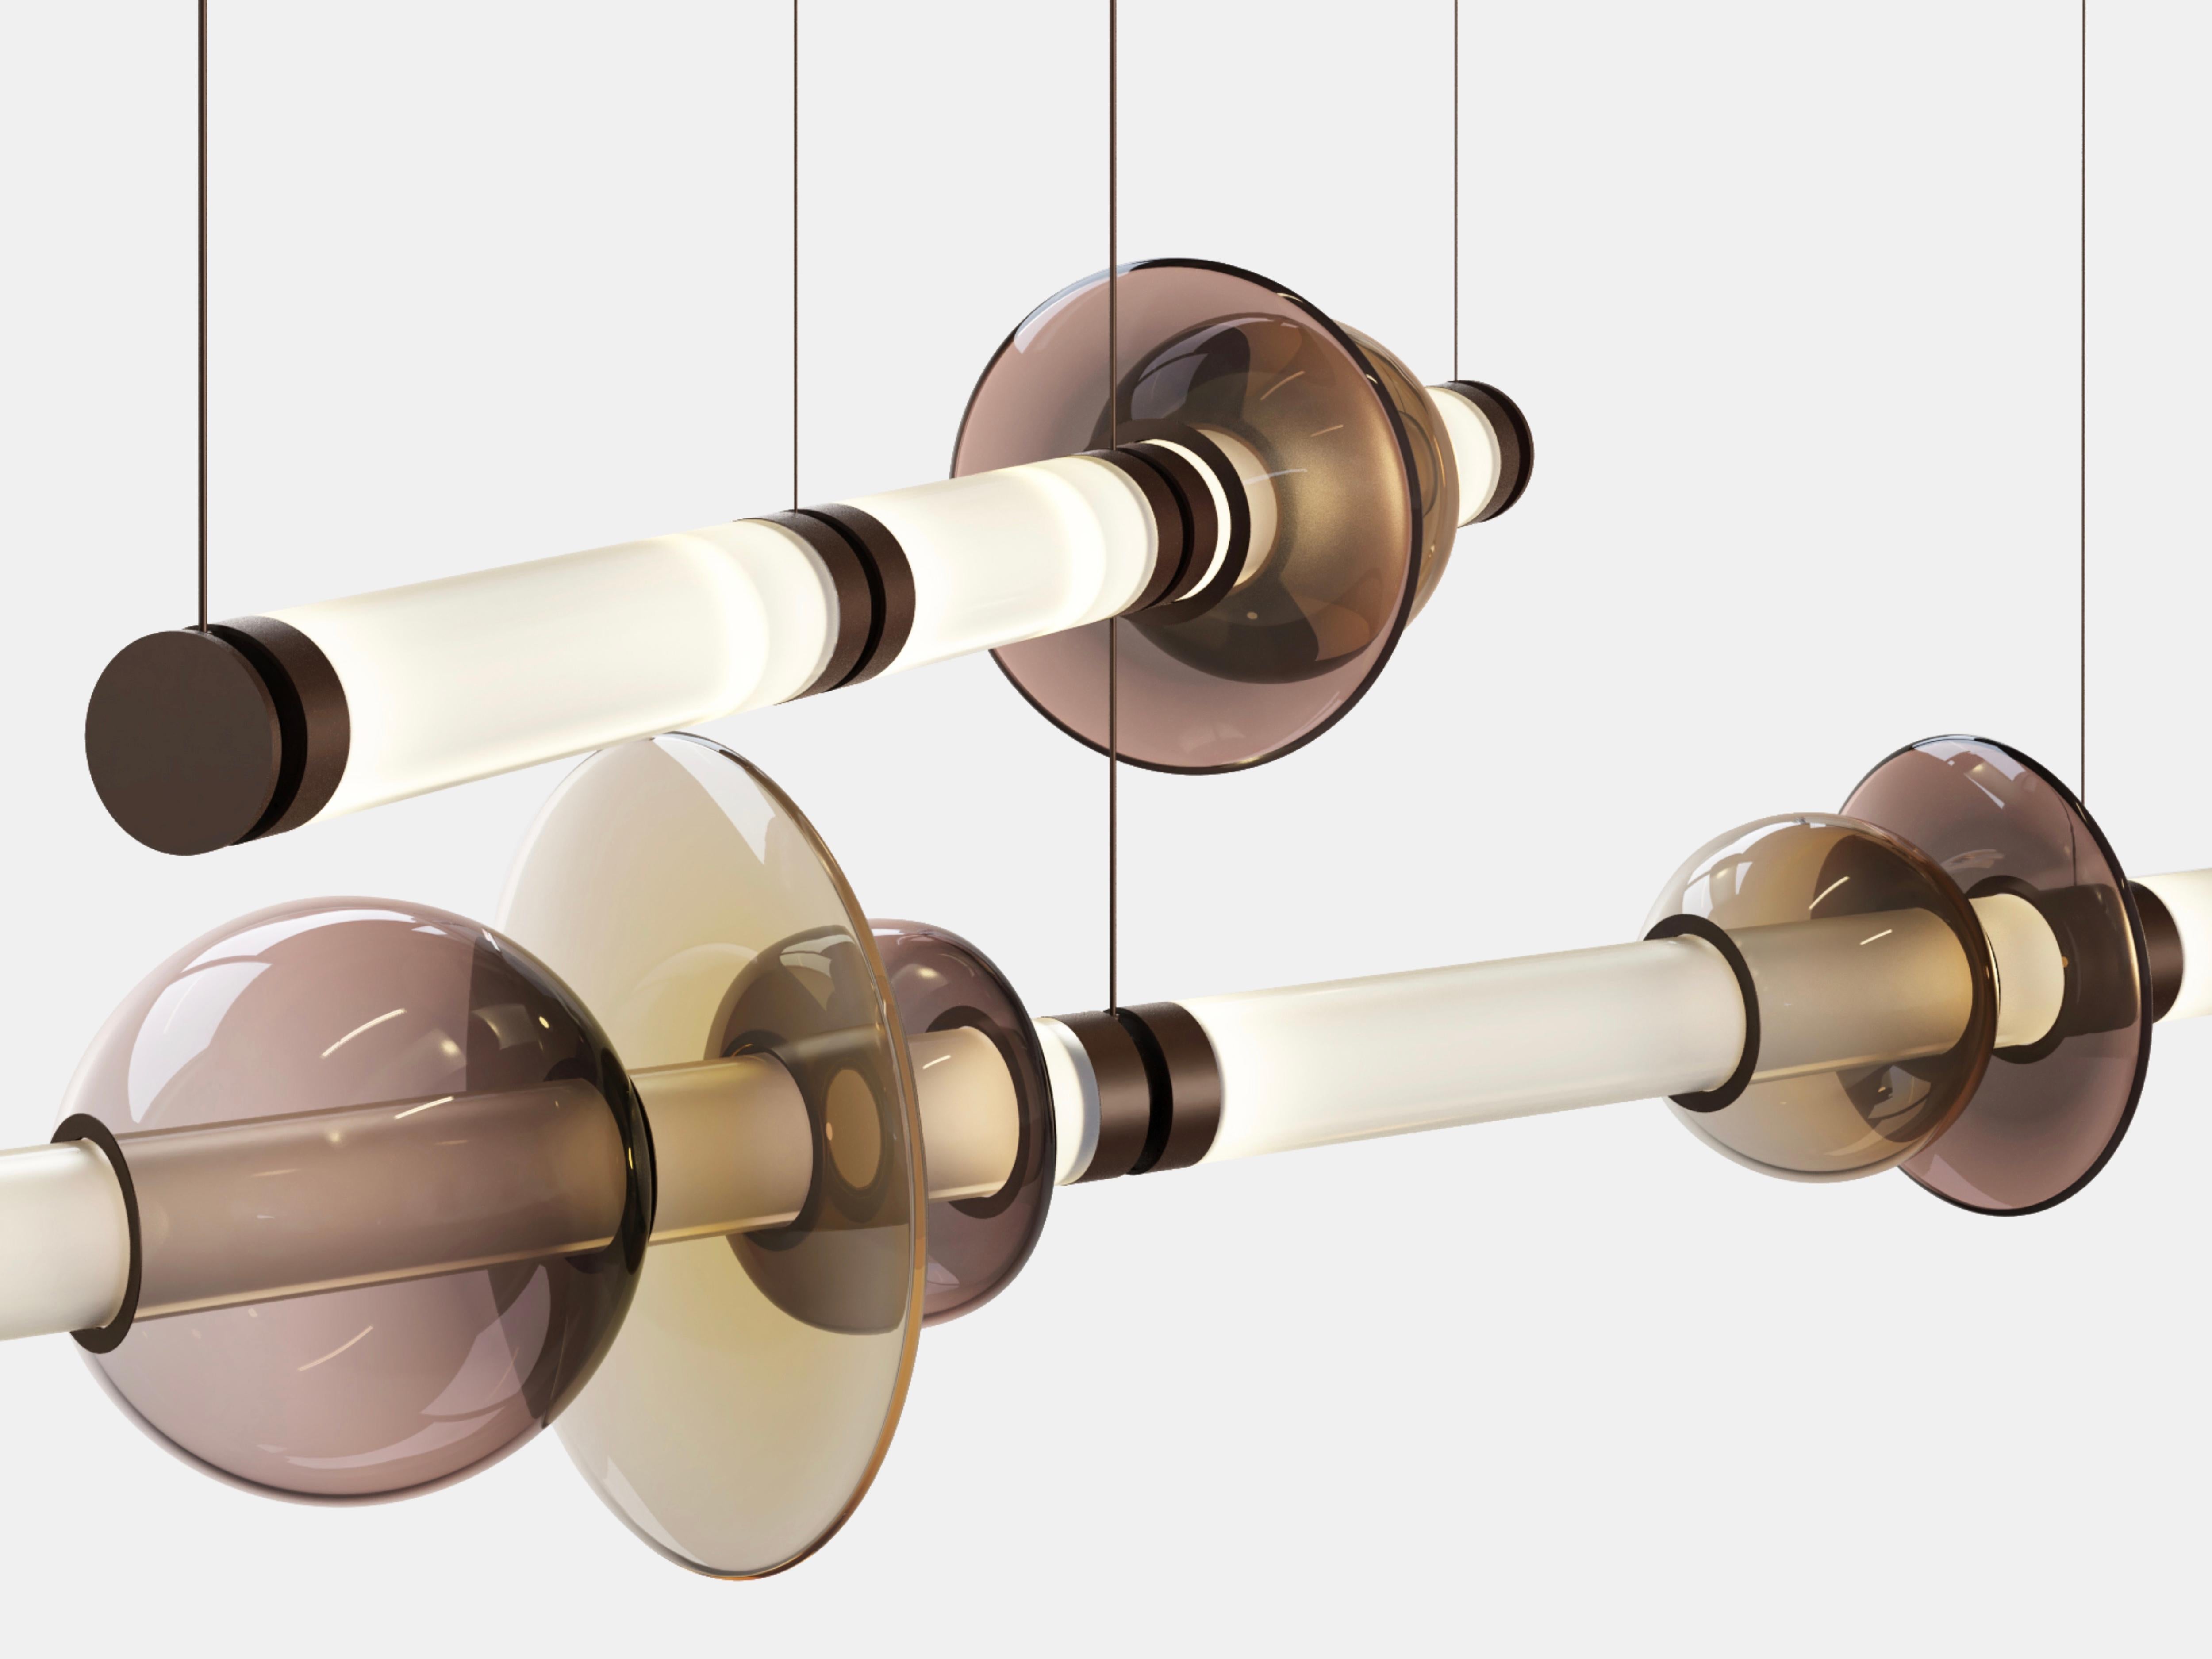 A lighting system with infinite interpretations, the Luna Chandelier 2 Tier  is a synergy of color, shape, and refracted light. Inspired by a lunar halo, the modular light fixture grows in every direction as its assembly system stems horizontally or